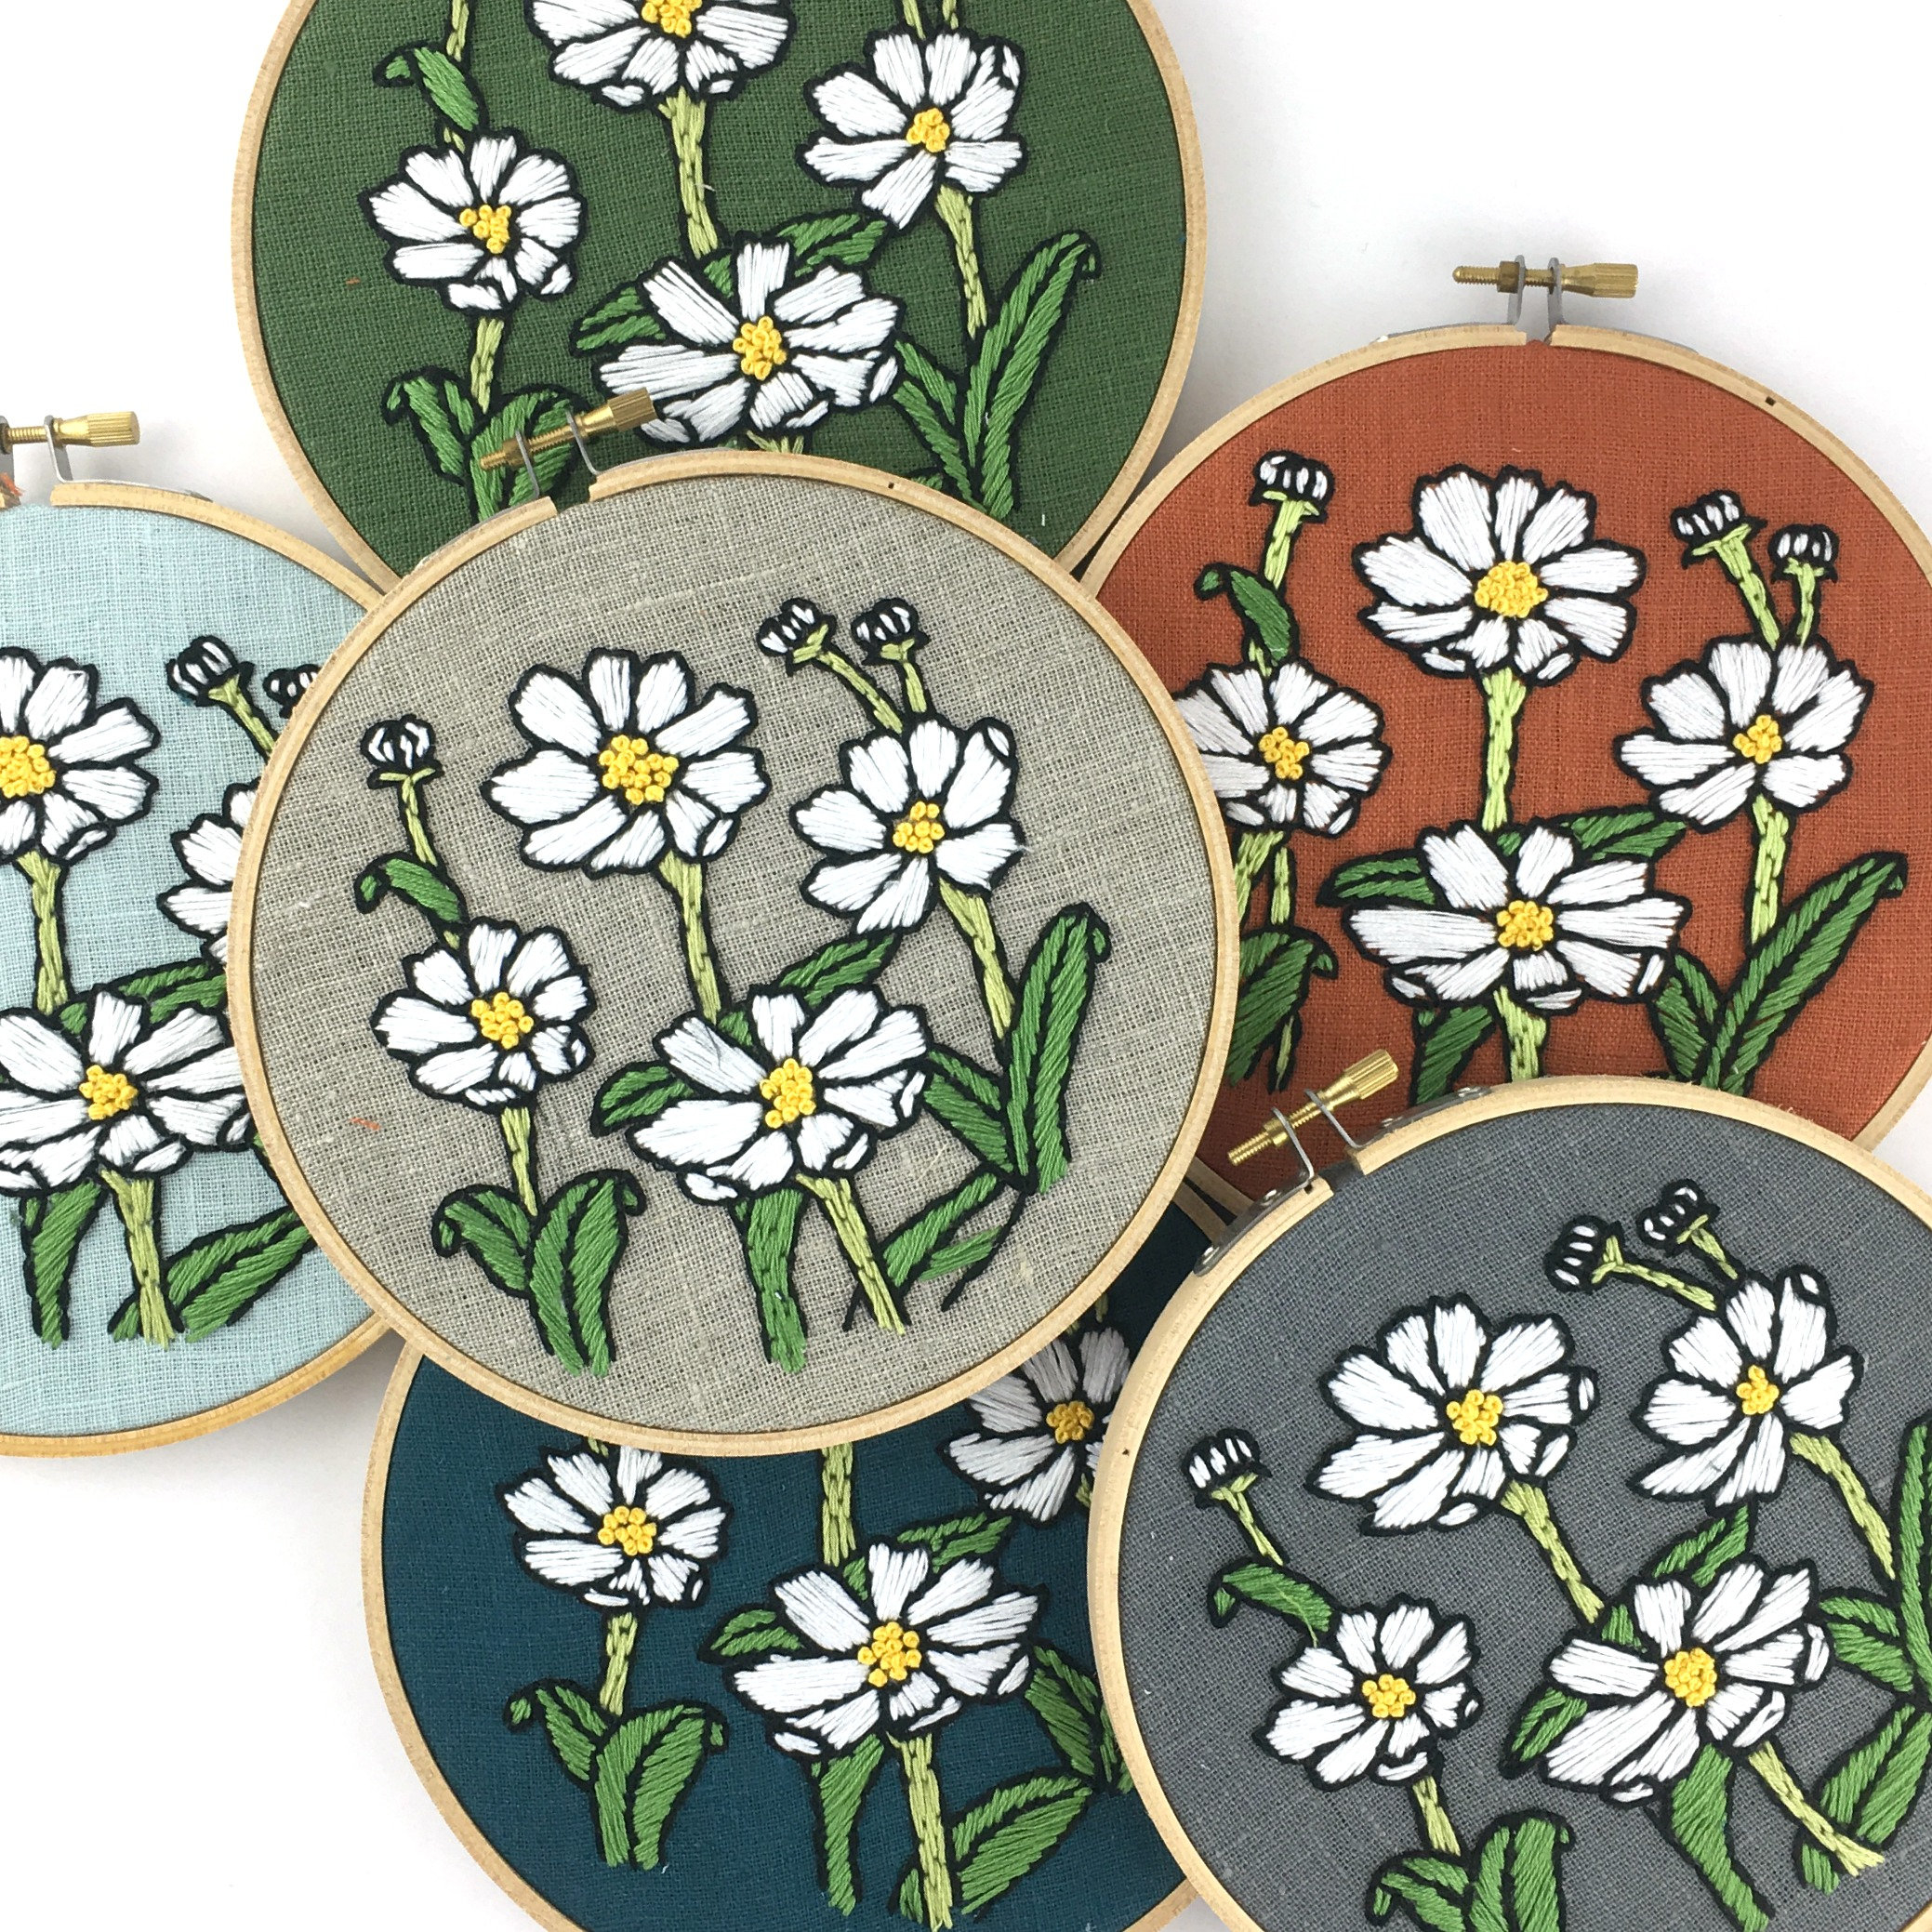 How To Read Embroidery Patterns Daisies Embroidery Kit Beginner Floral Embroidery Floral